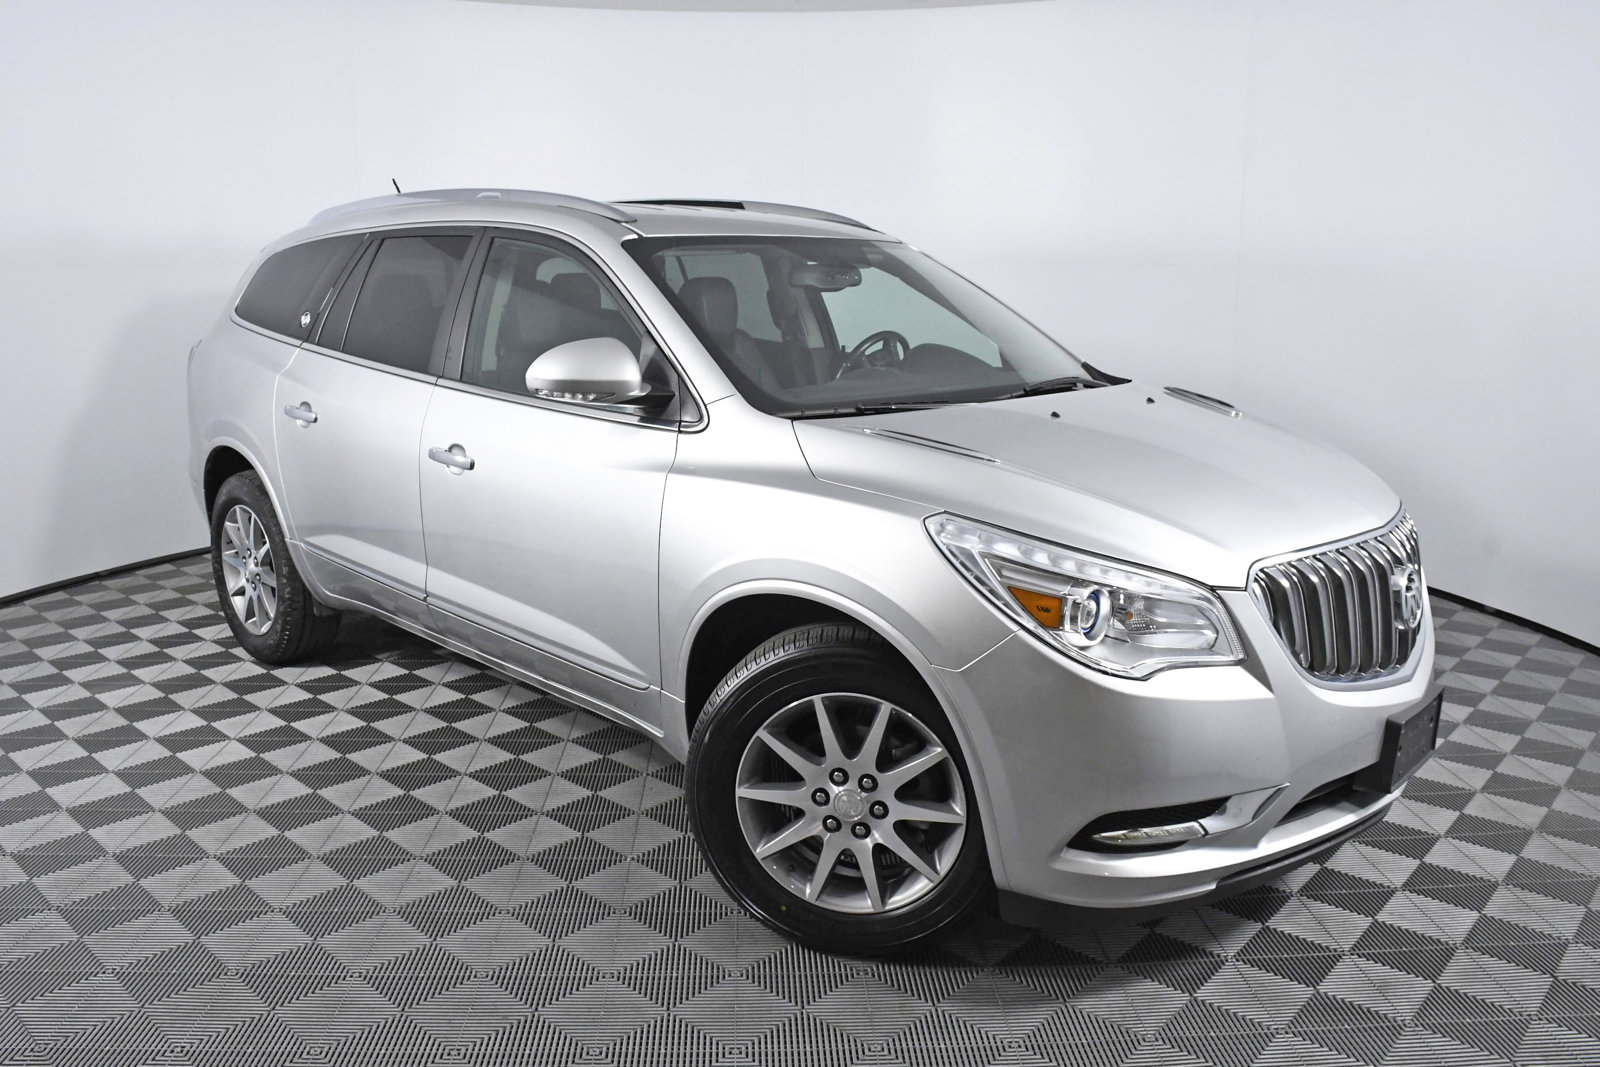 Pre-Owned 2017 Buick Enclave Leather Group Sport Utility in Palmetto Bay  #J170175 | HGreg Nissan Kendall